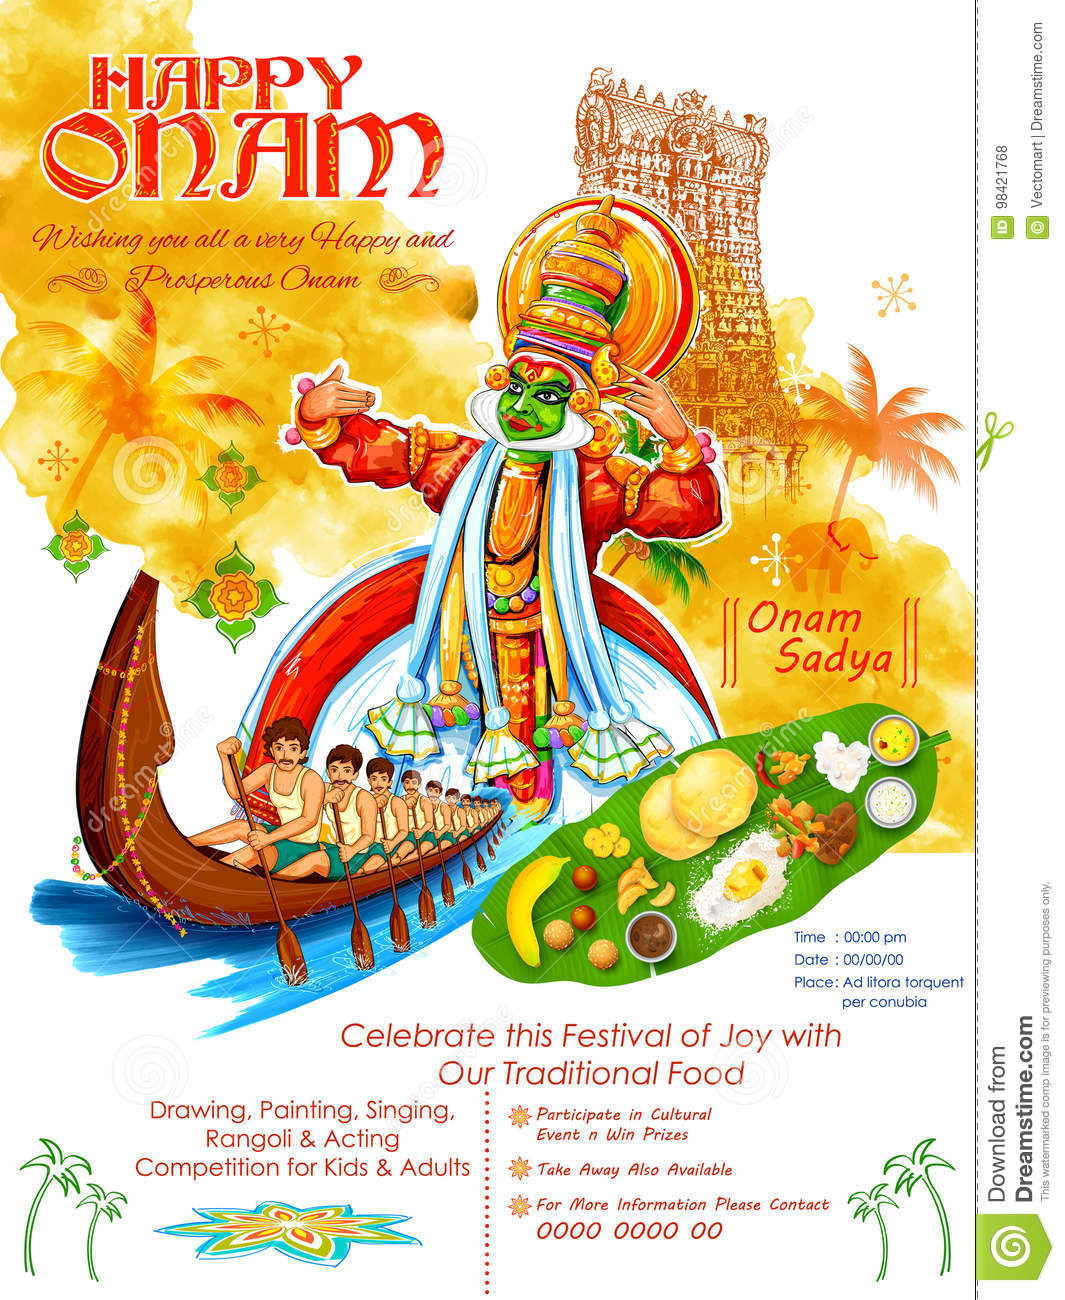 Onam Images Wallpapers Pics Photos 2020